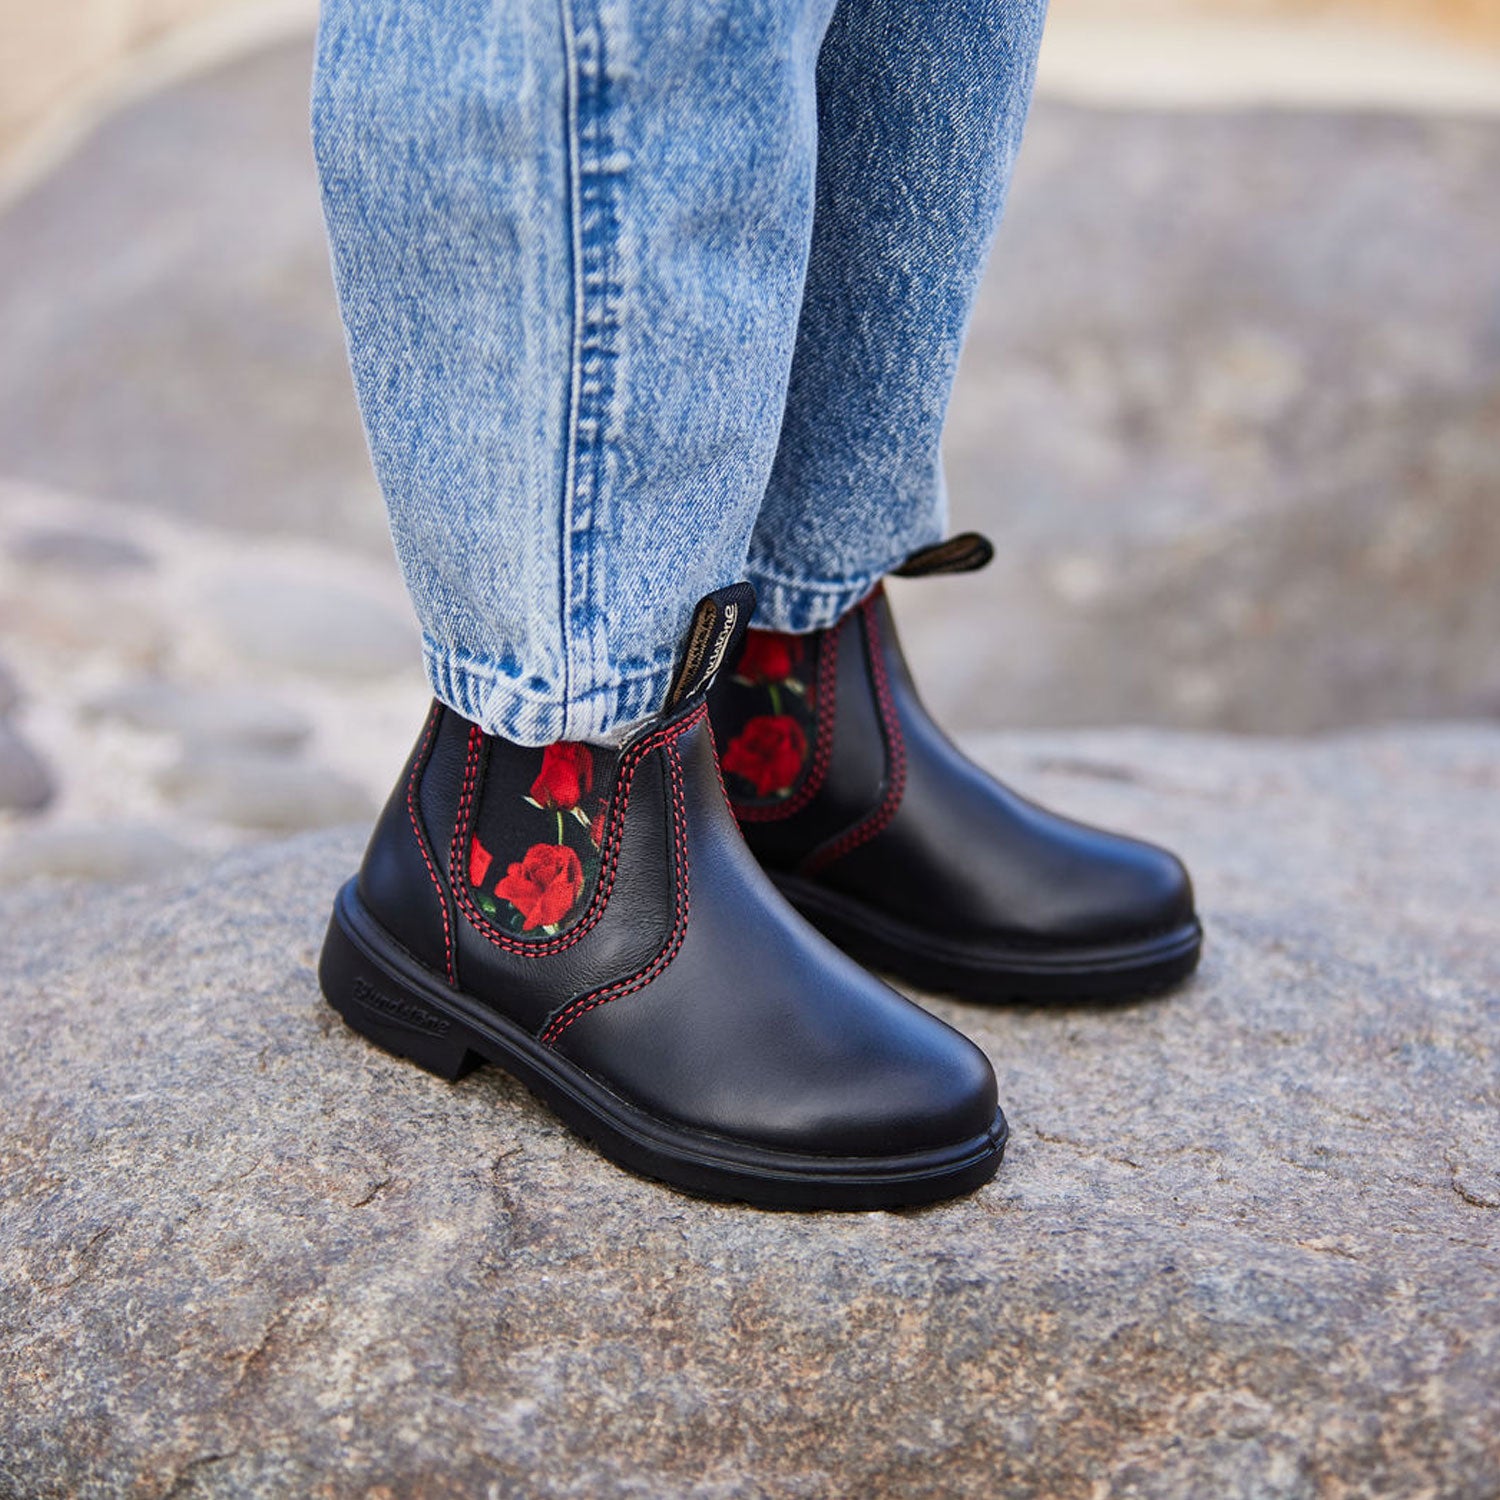 Blundstone 2252 Kids Black with Red Rose Elastic standing on a rock